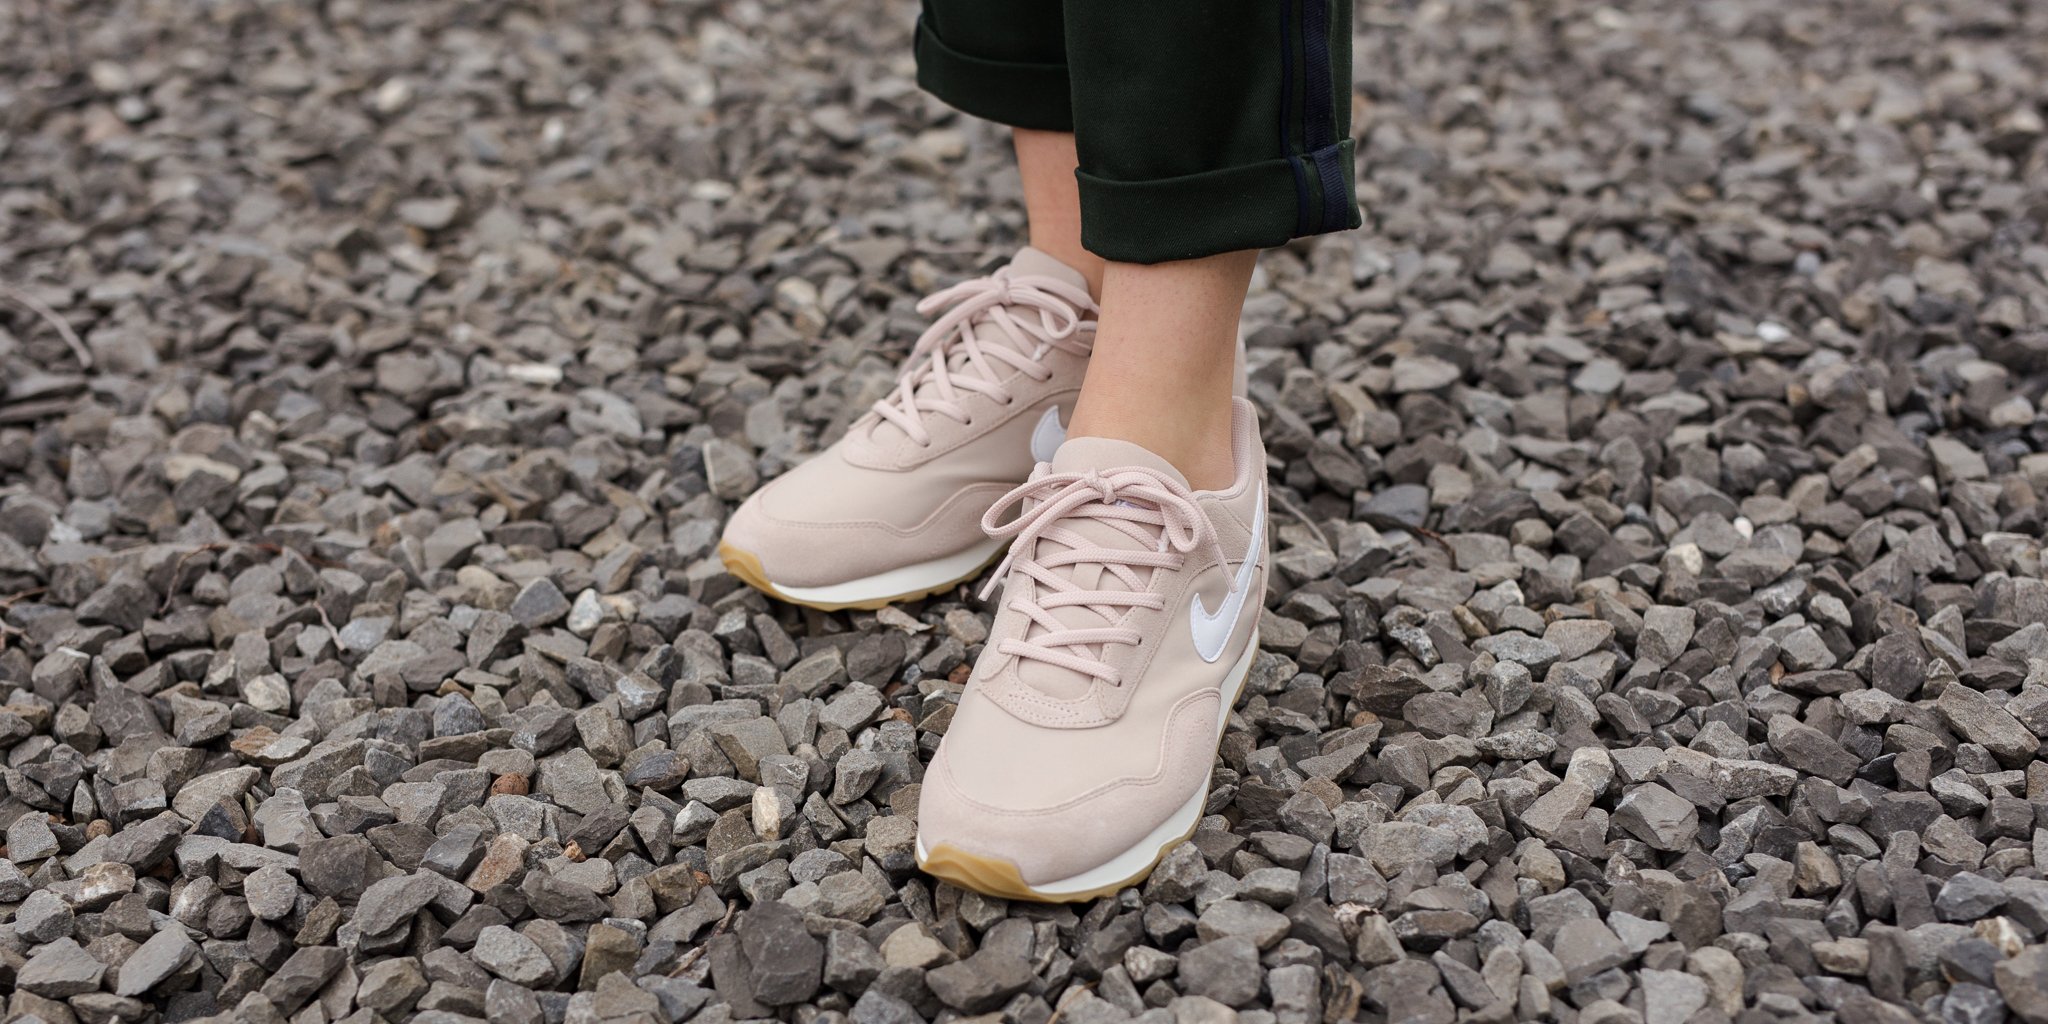 oxígeno oferta Puntuación Titolo on Twitter: "summerSALE is ON now❗🏜🐫 Nike W Outburst - Particle  Beige Purchase HERE: https://t.co/lRINGtoEz9 #outburst #nike #wmns #beige  #white #sand #sail https://t.co/sOhYhY2mXg" / Twitter